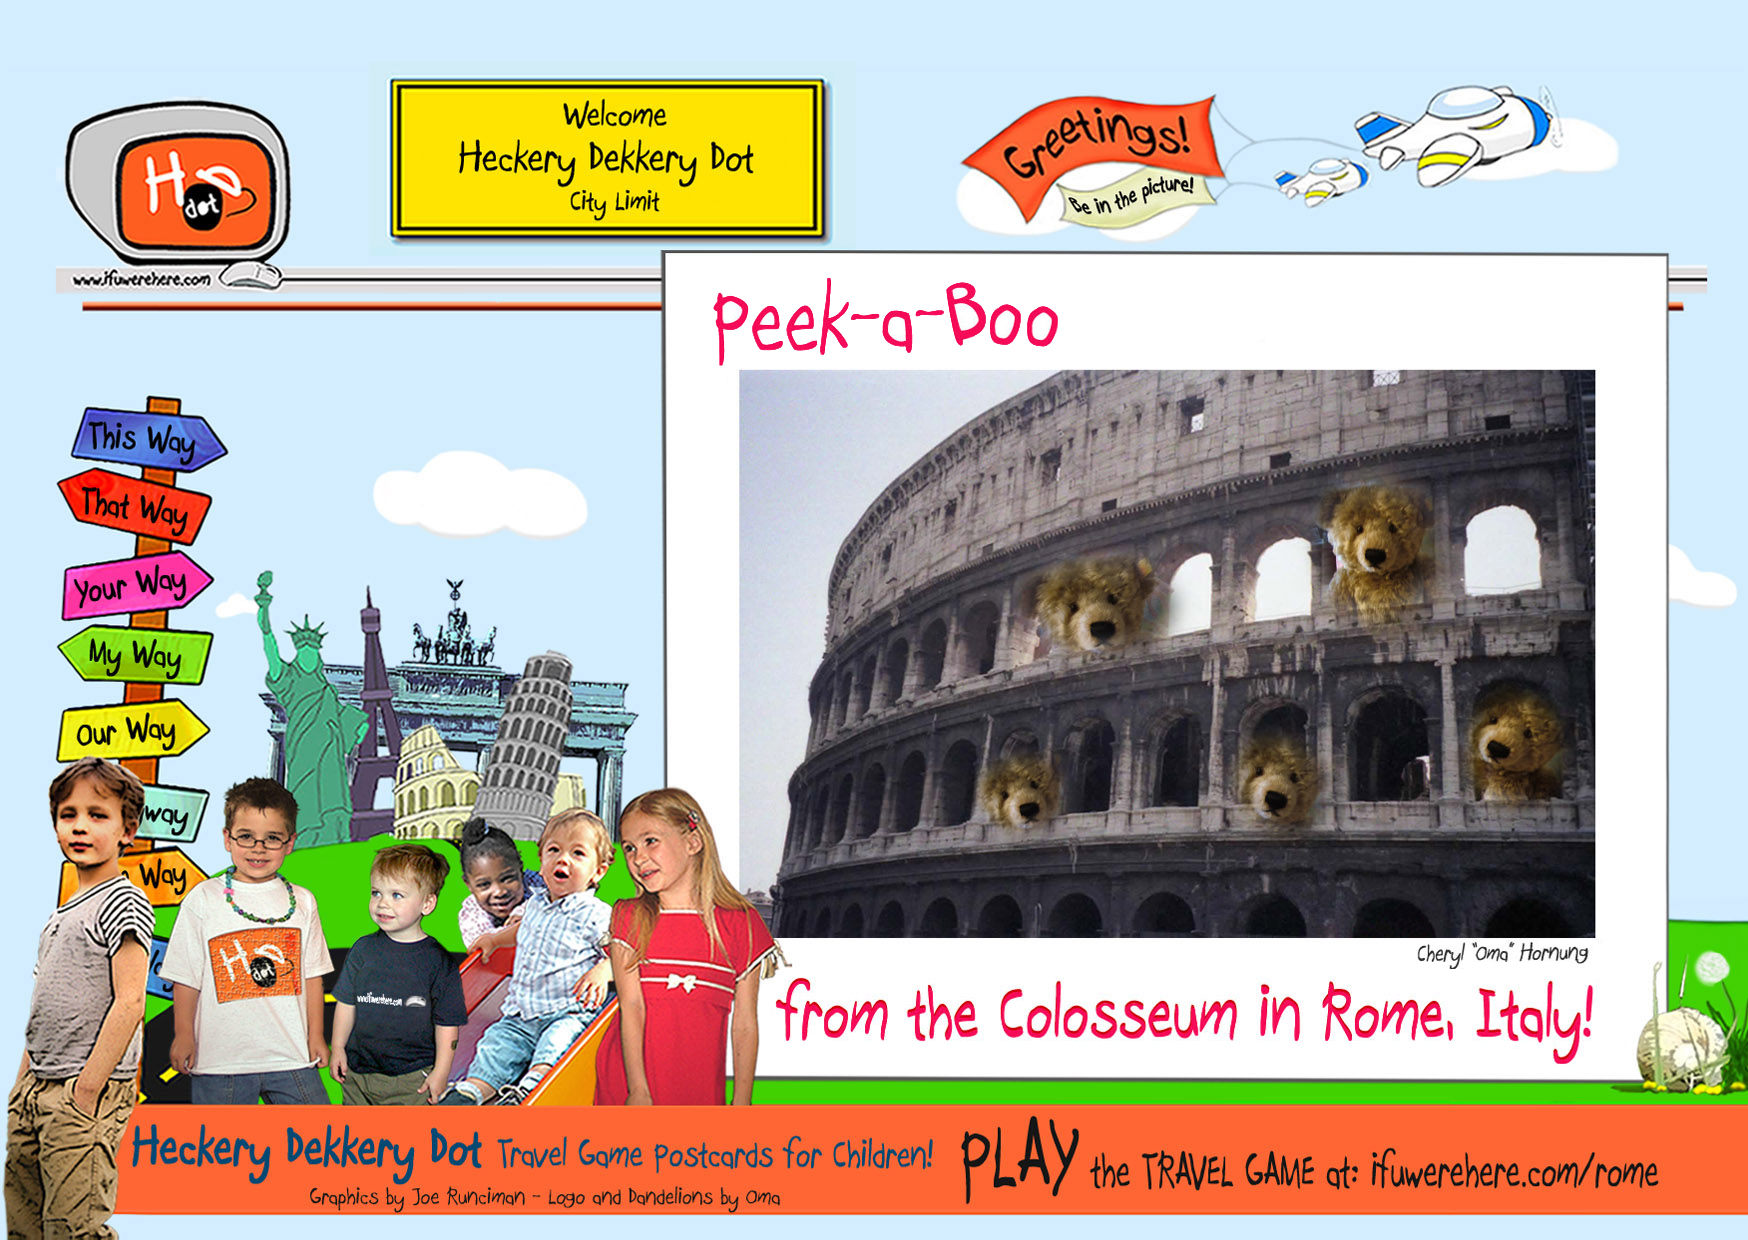 (3) Grab your Teddy Bear, and let's go to the Colosseum!